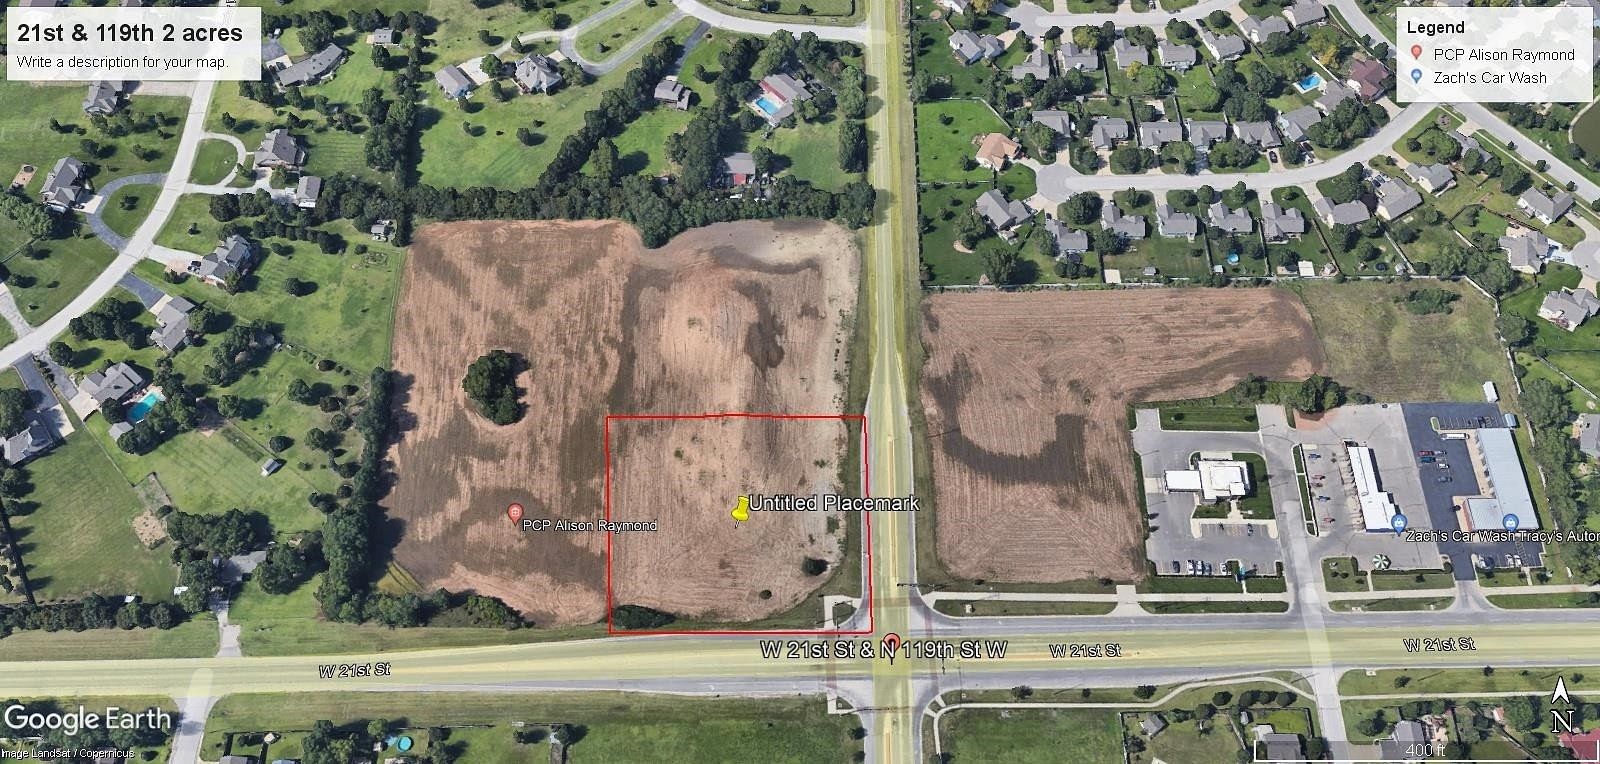 2 Acres of Mixed-Use Land for Sale in Wichita, Kansas